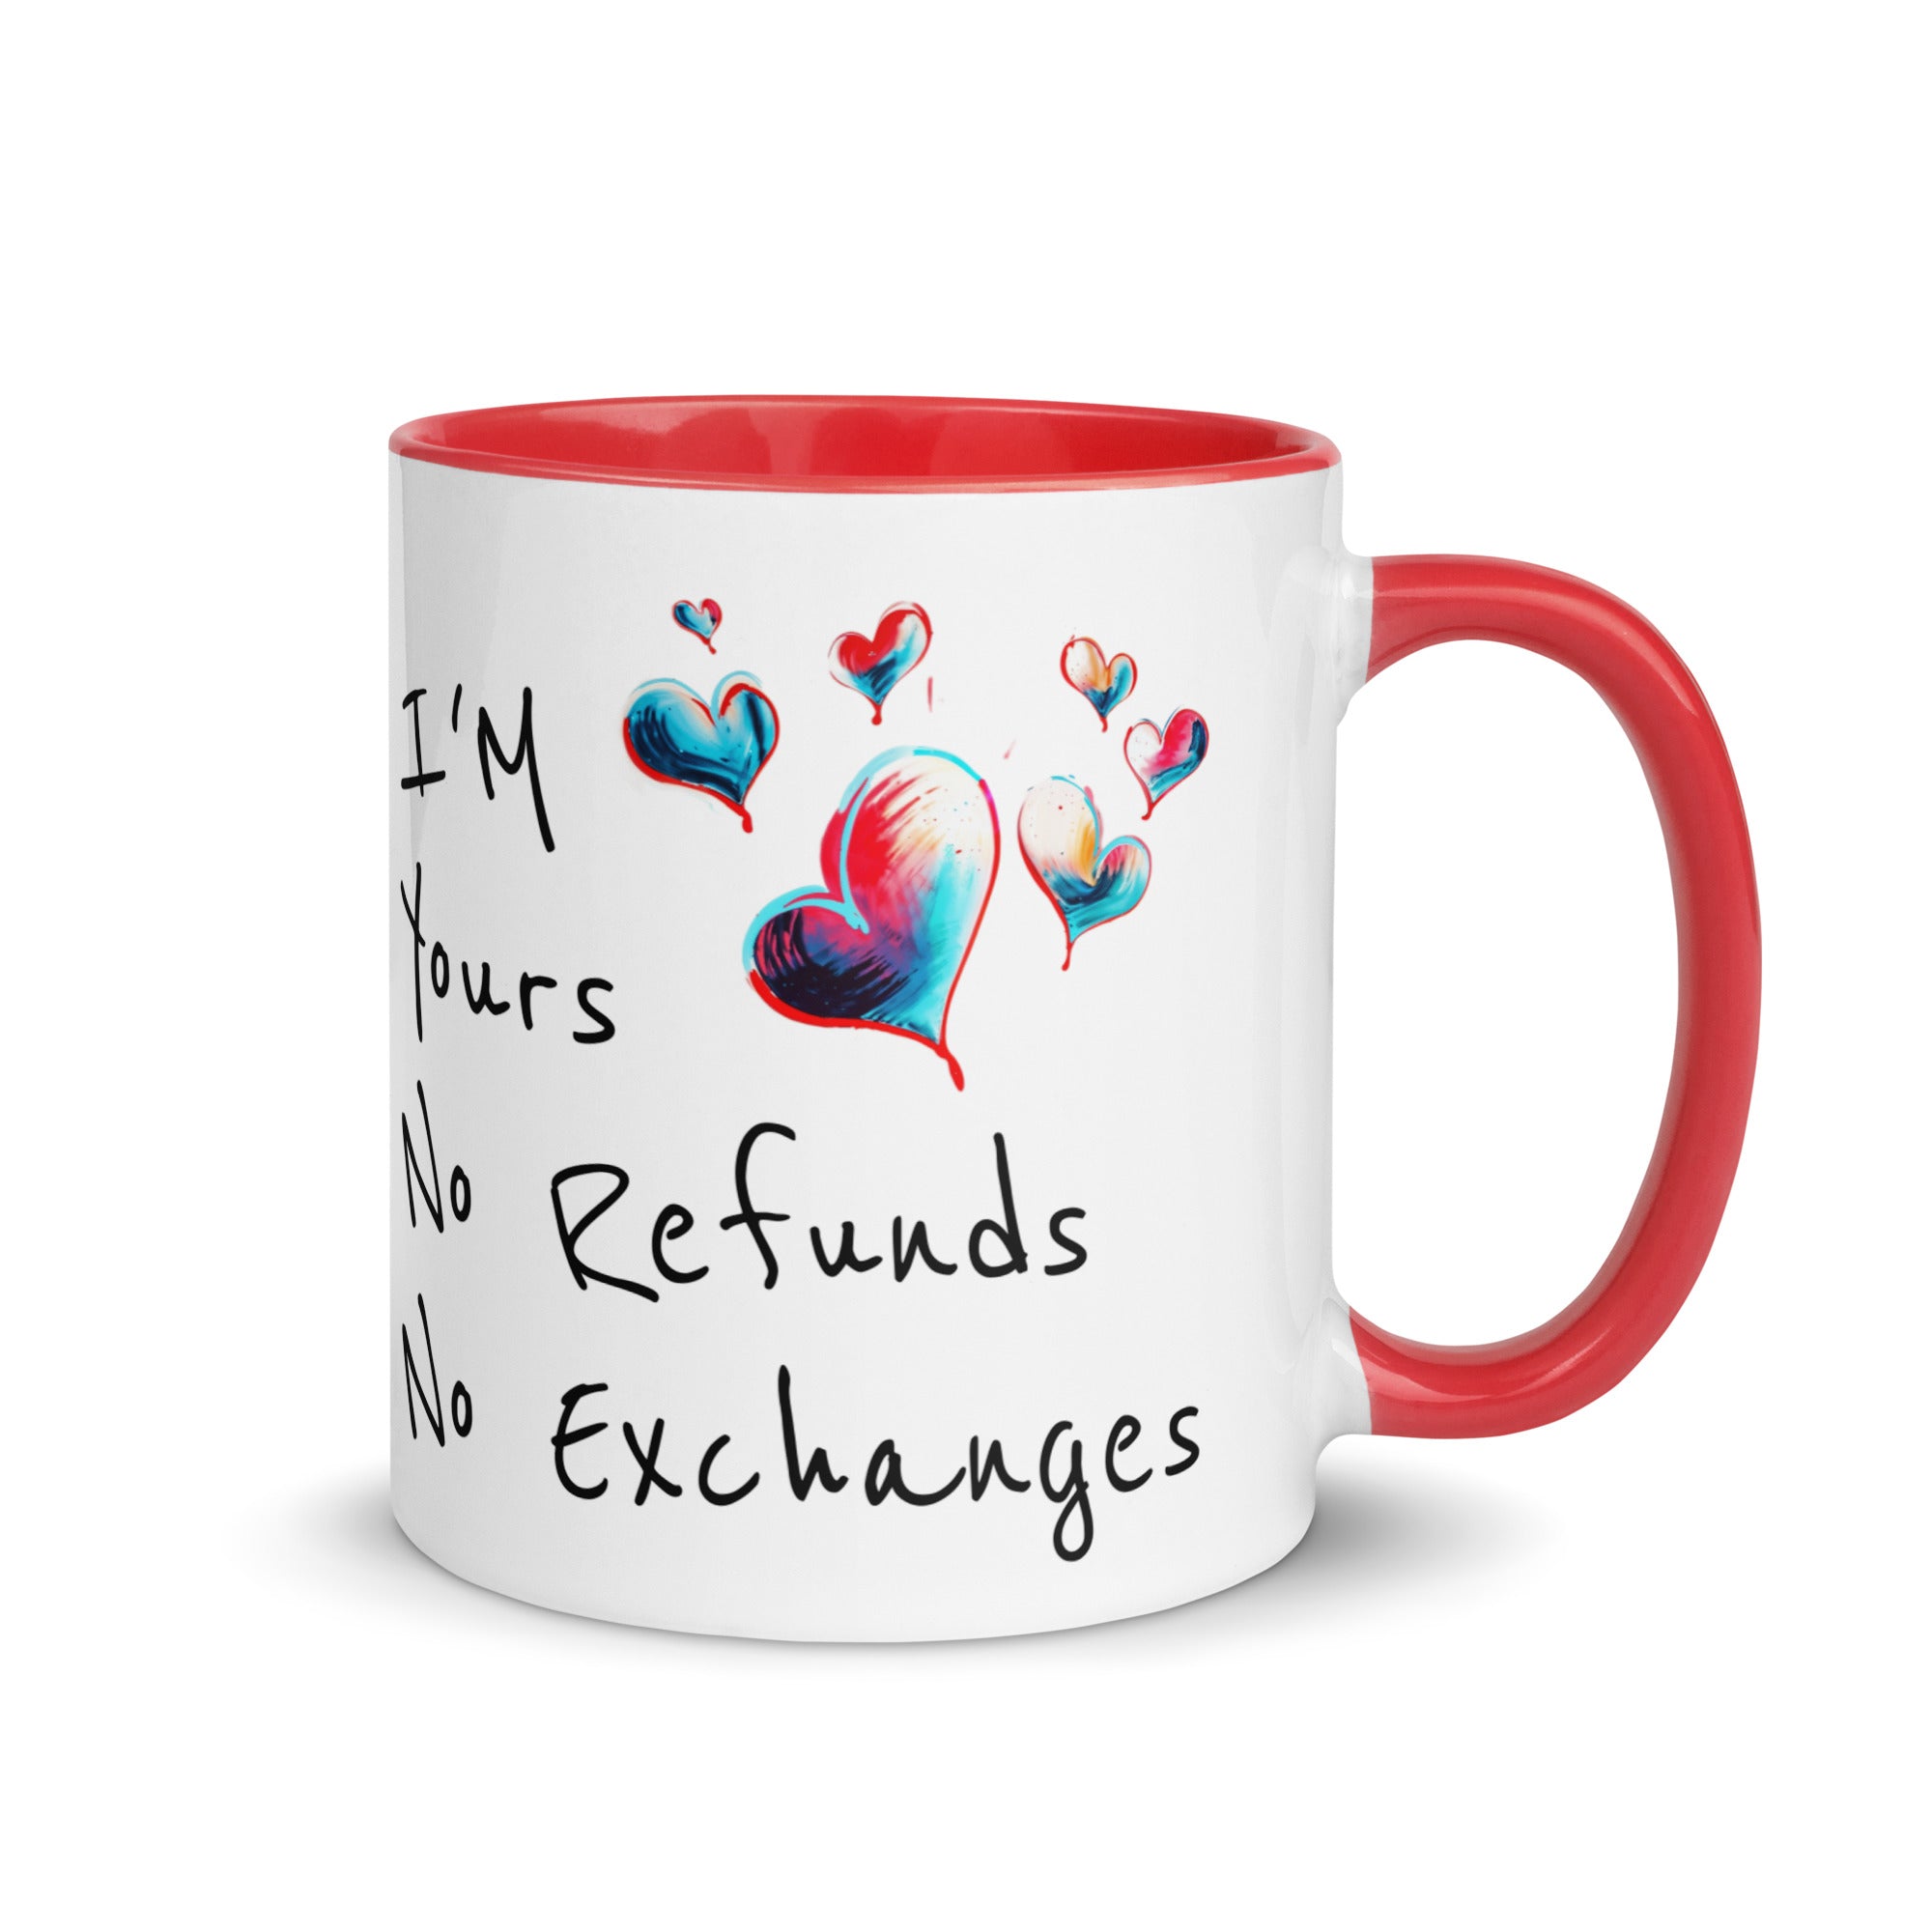 I'm Yours, No Refunds, No Exchanges Mug - Gift for Him & Her Red 11 oz DenBox